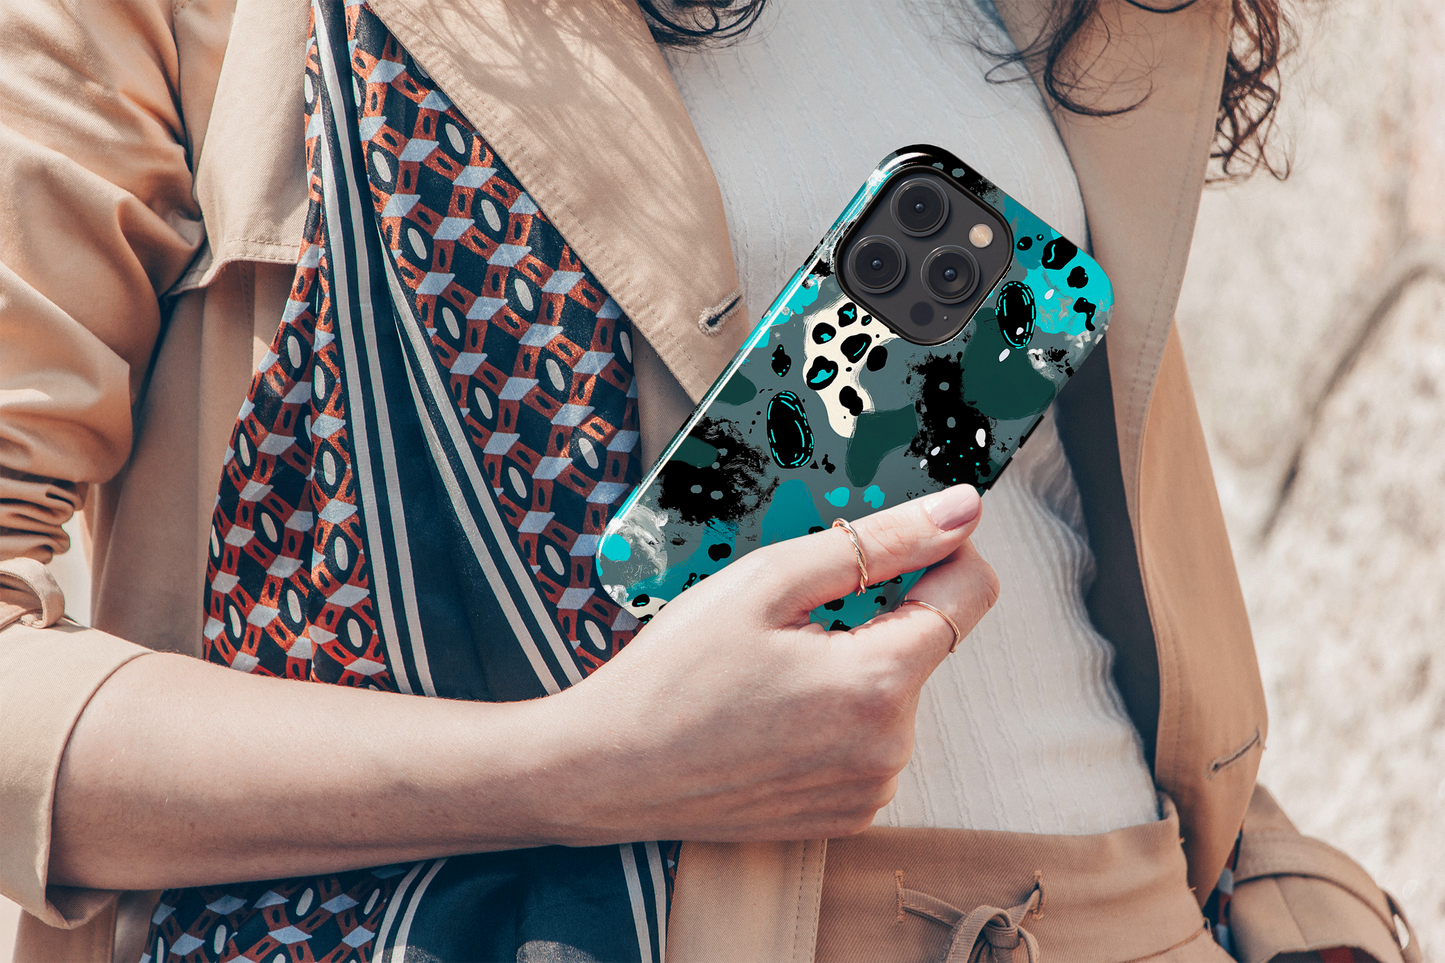 Aqua Abstract (iPhone MagSafe Case)Elevate your iPhone's protection and style with RimaGallery's Abstract teal and black speckled pattern on iphone MagSafe Case against a dark backdrop. Enjoy dual-layRimaGallery